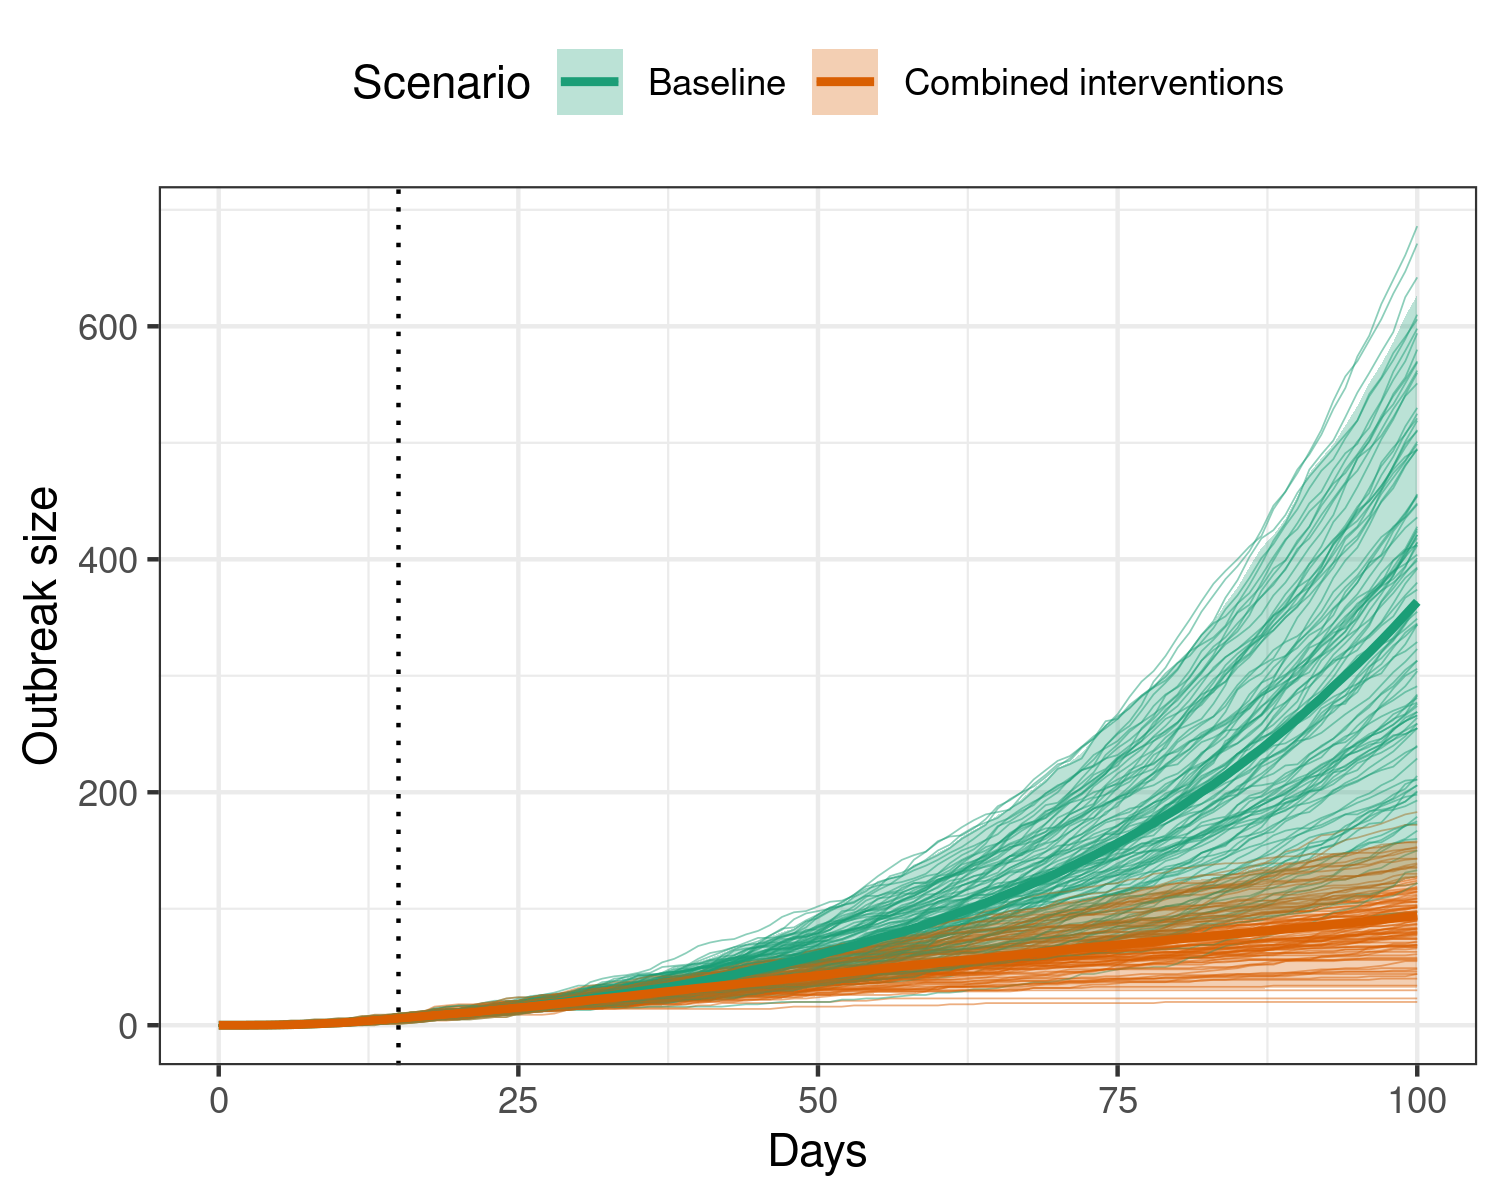 Effect of implementing multiple simultaneous interventions to reduce transmission during an ebola outbreak, all beginning on the 15th day (dotted vertical line), and remaining active for the remainder of the model duration. Applying these interventions substantially reduces the final size of the outbreak, with a potential plateau in the outbreak size reached at 100 days. Individual scenario replicates are shown in the background, while the shaded region shows the 95% interval, and the heavy central line shows the mean for each scenario.